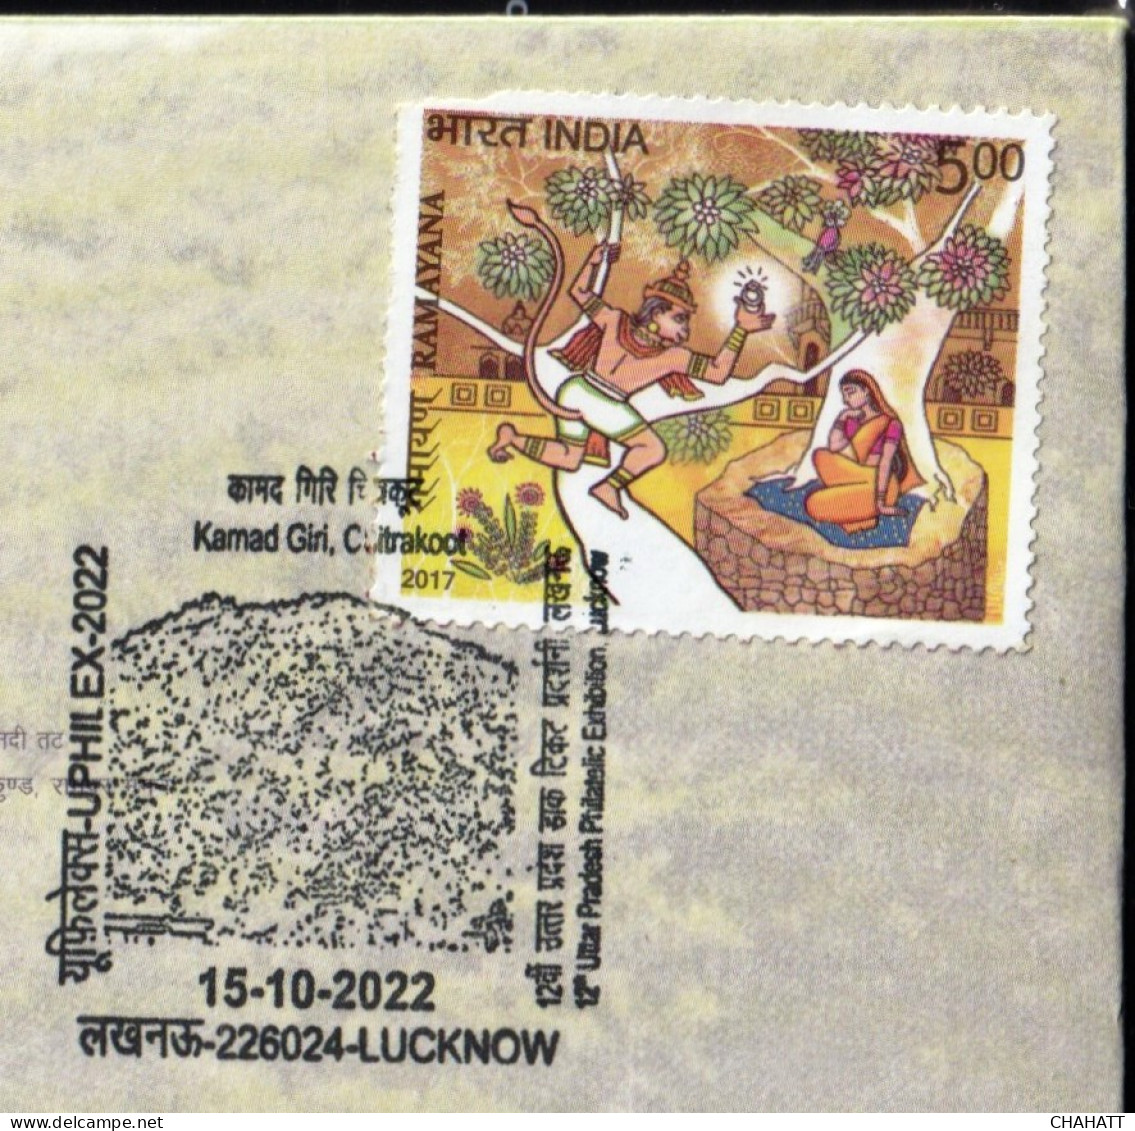 HINDUISM - RAMAYAN- KAMAD GIRI, FOREST HILLS OF CHITRAKOOT-PICTORIAL CANCELLATION - SPECIAL COVER - INDIA -2022- BX4-23 - Hinduismo